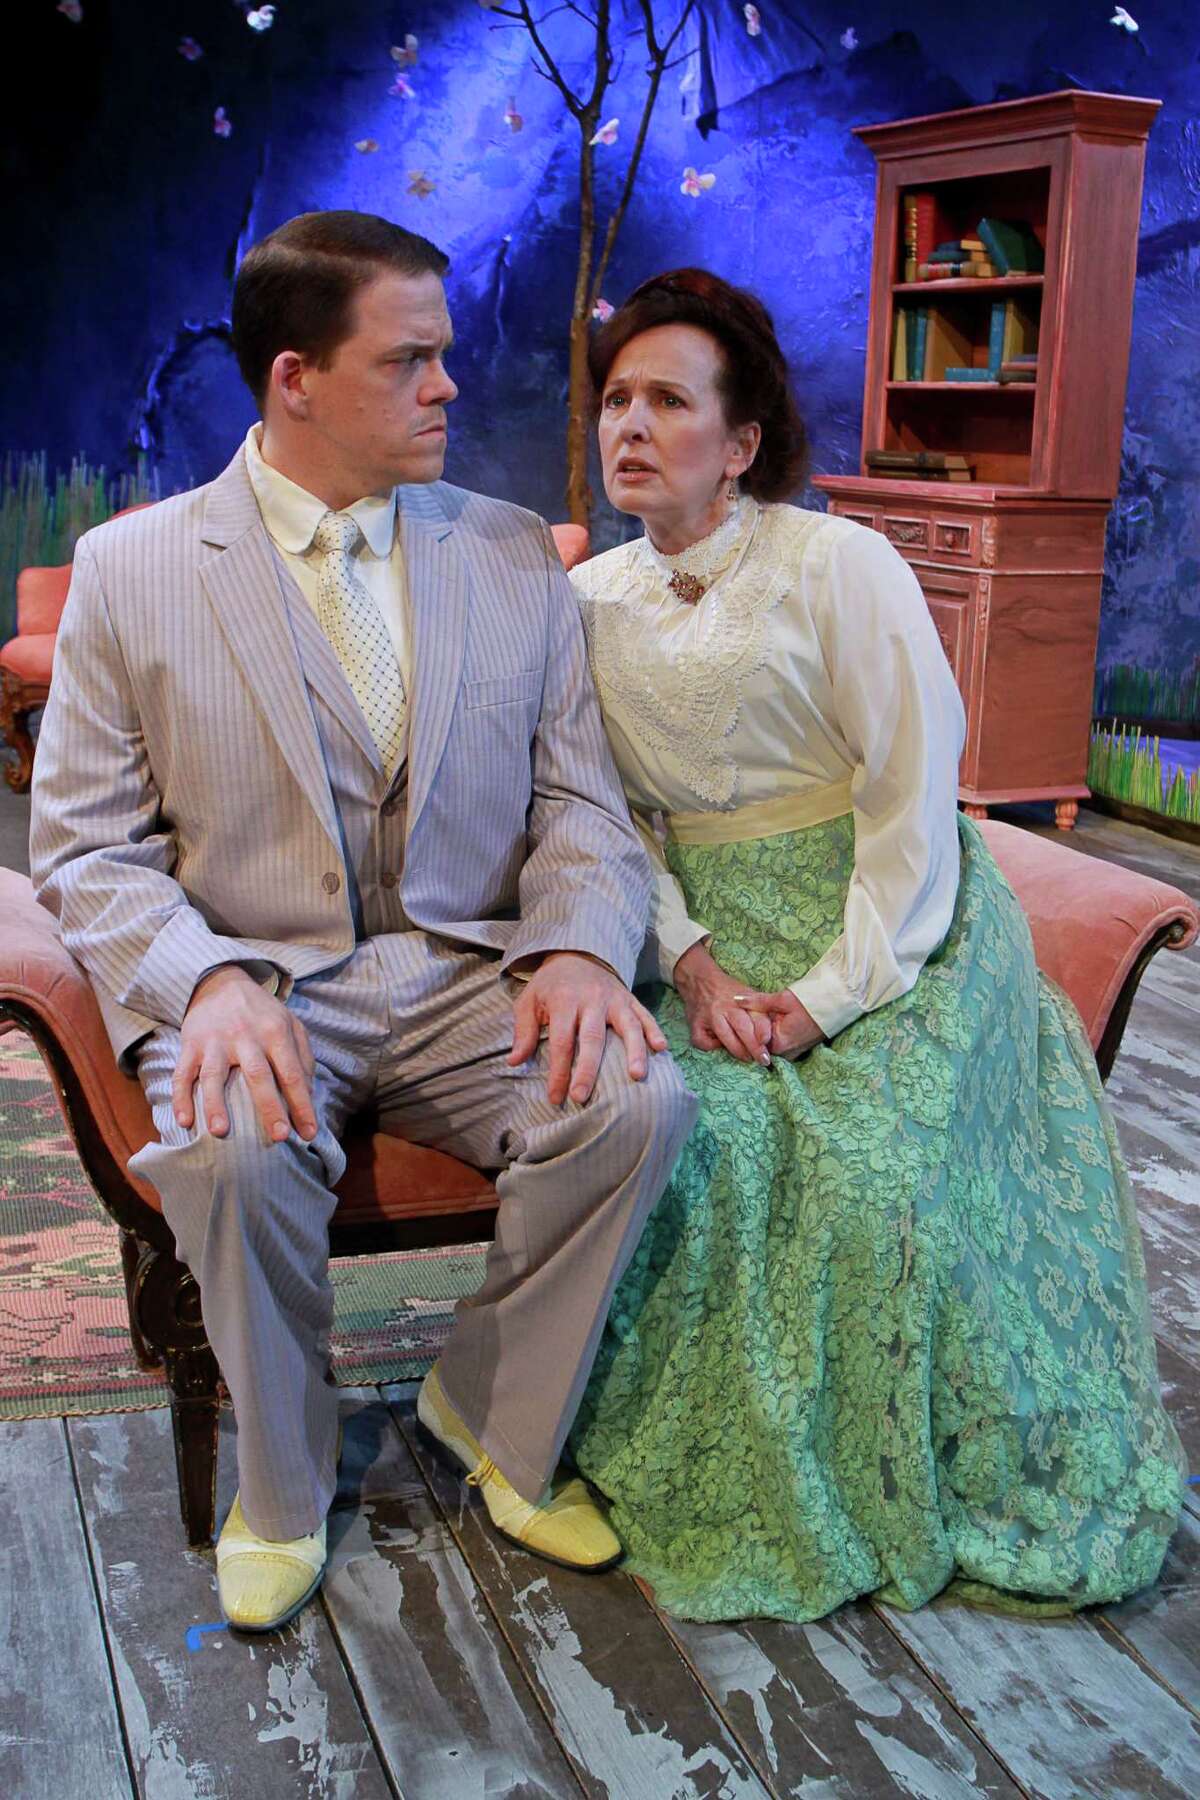 Kregg Dailey as Lopahkin, and Celeste Roberts as Lubov, in this scene from Classical Theatre Company's production of the Chekhov classic, "The Cherry Orchard." (For the Chronicle/Gary Fountain, April 7, 2015)